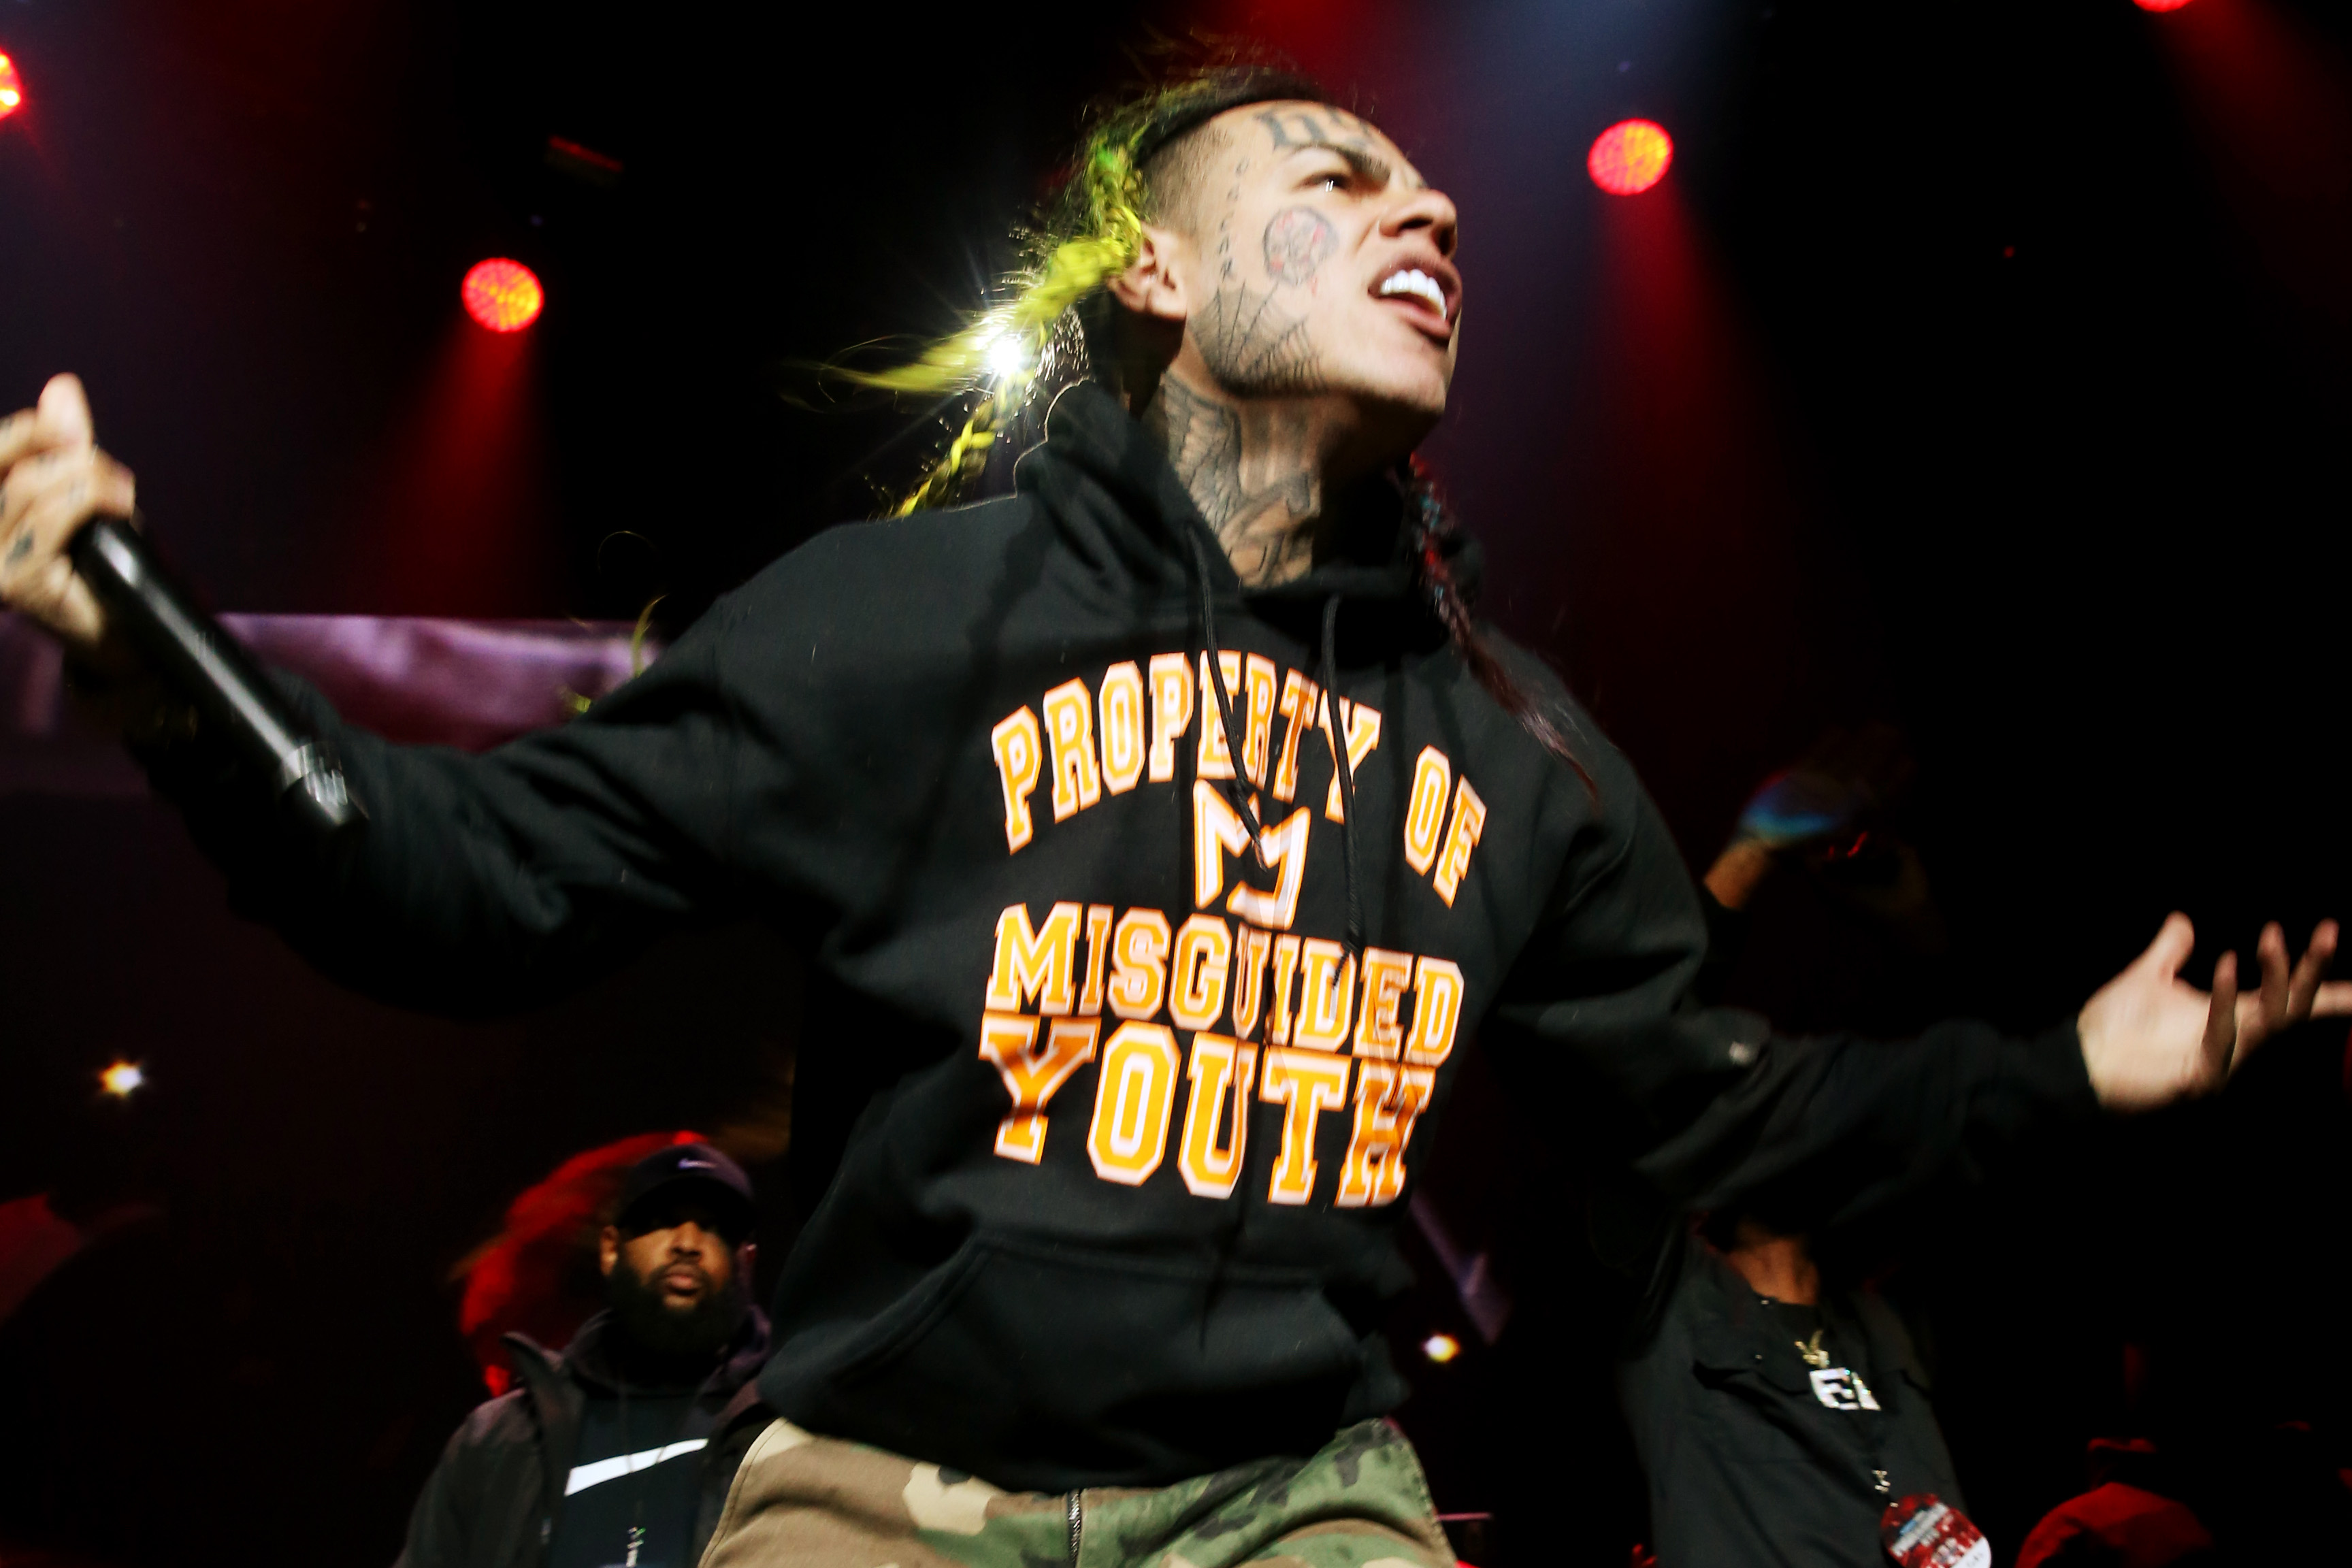 6ix9ine Teased By Lil Durk, Blueface, Lil Tjay Over “TattleTales” Projections